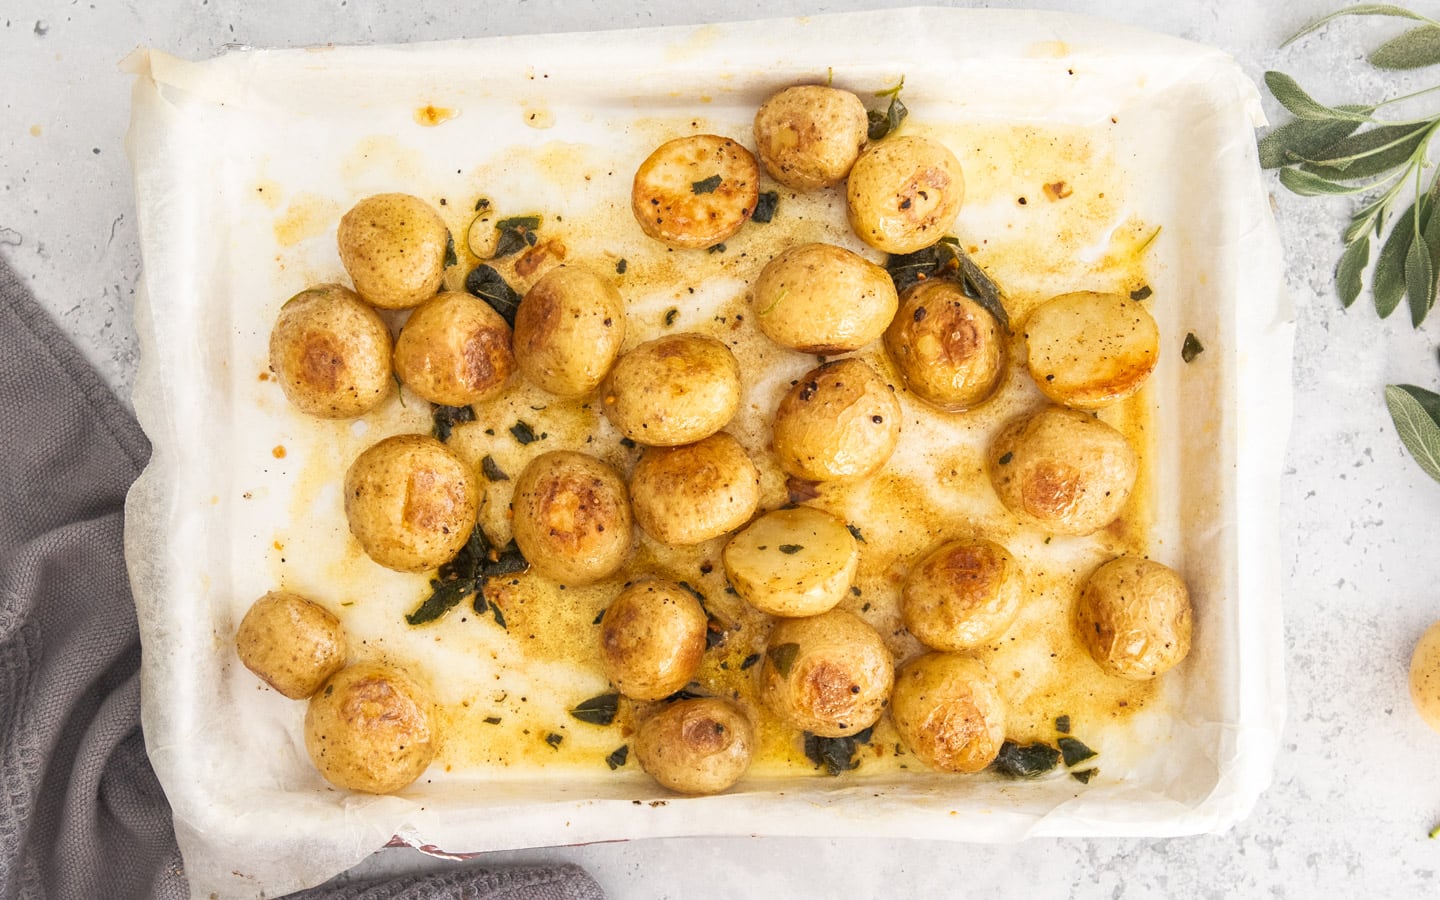 The roasted potatoes dressed with sage browned butter on a baking sheet.